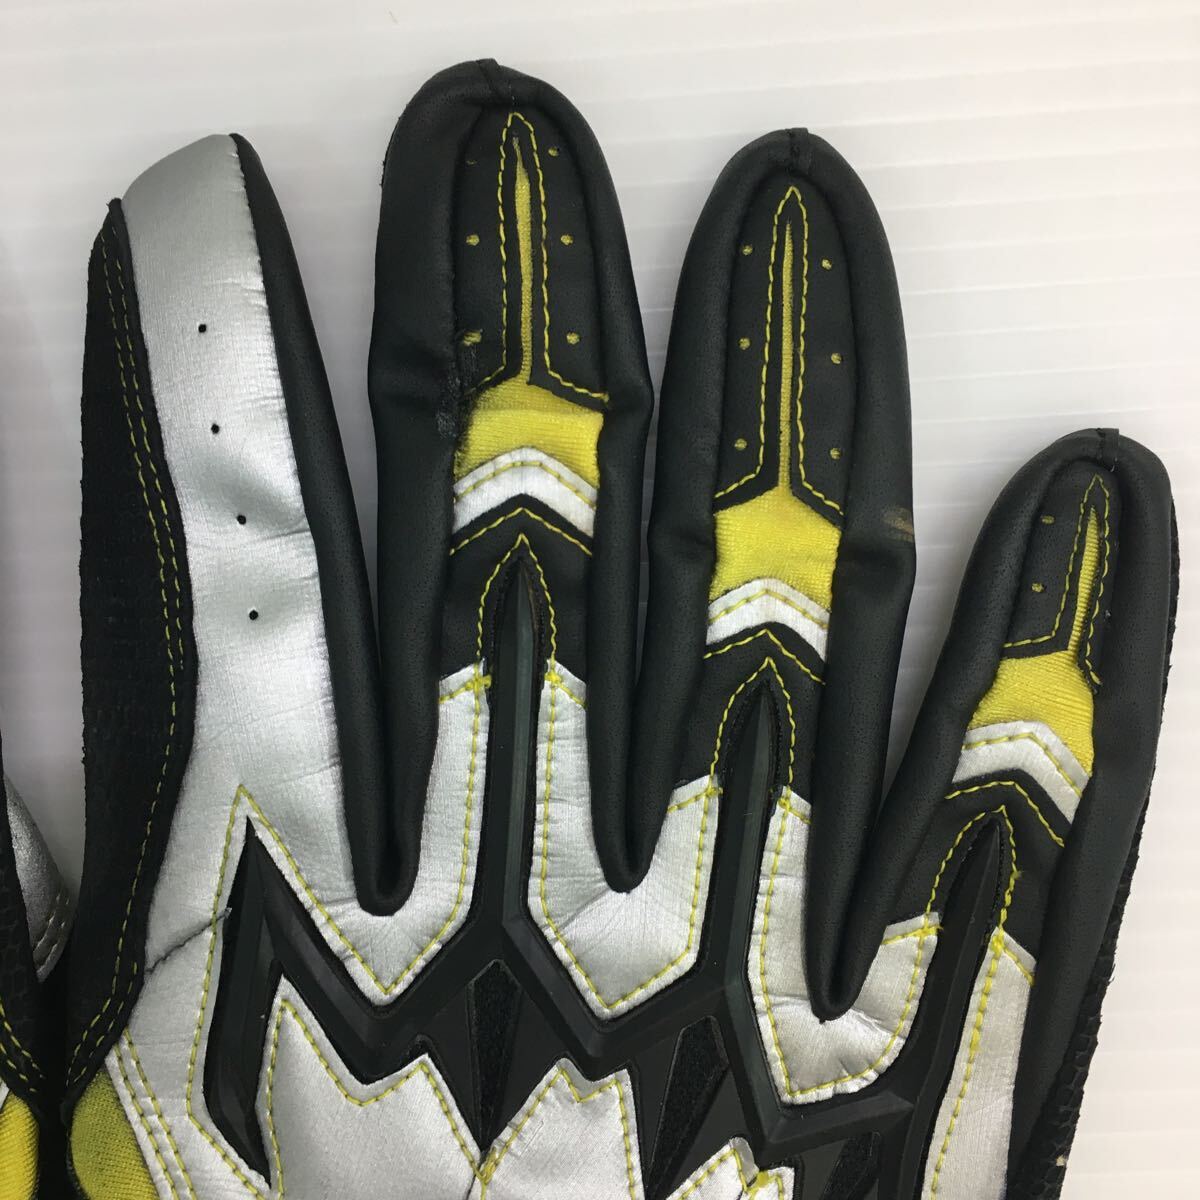 H-3810 Fukuoka SoftBank Hawks close wistaria .. player autographed batting glove both hand composition lamp . there is a certificate, Mizuno gloves baseball used 